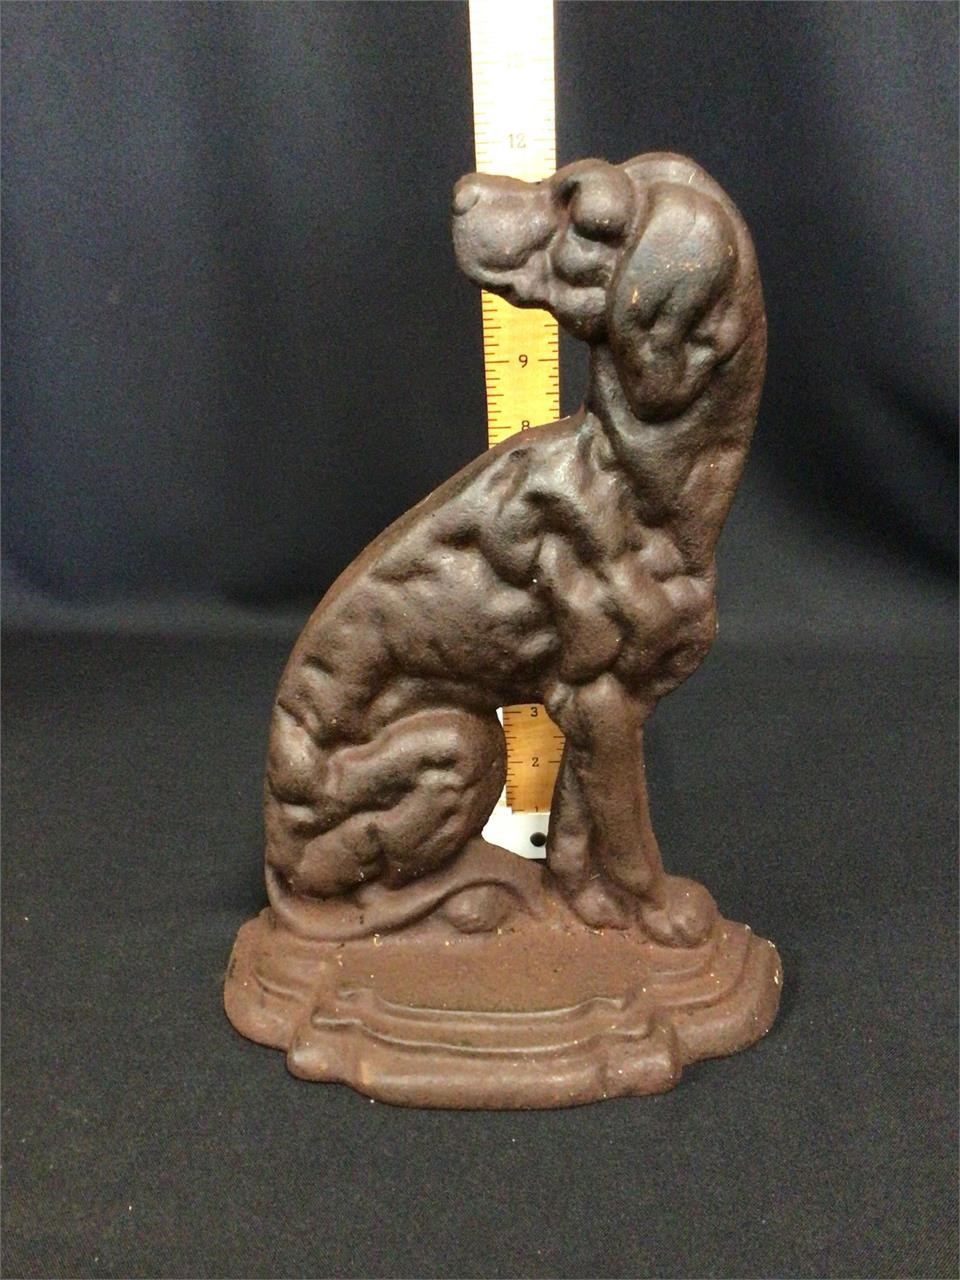 Hot Summer Collectable and Consignment Auction #1